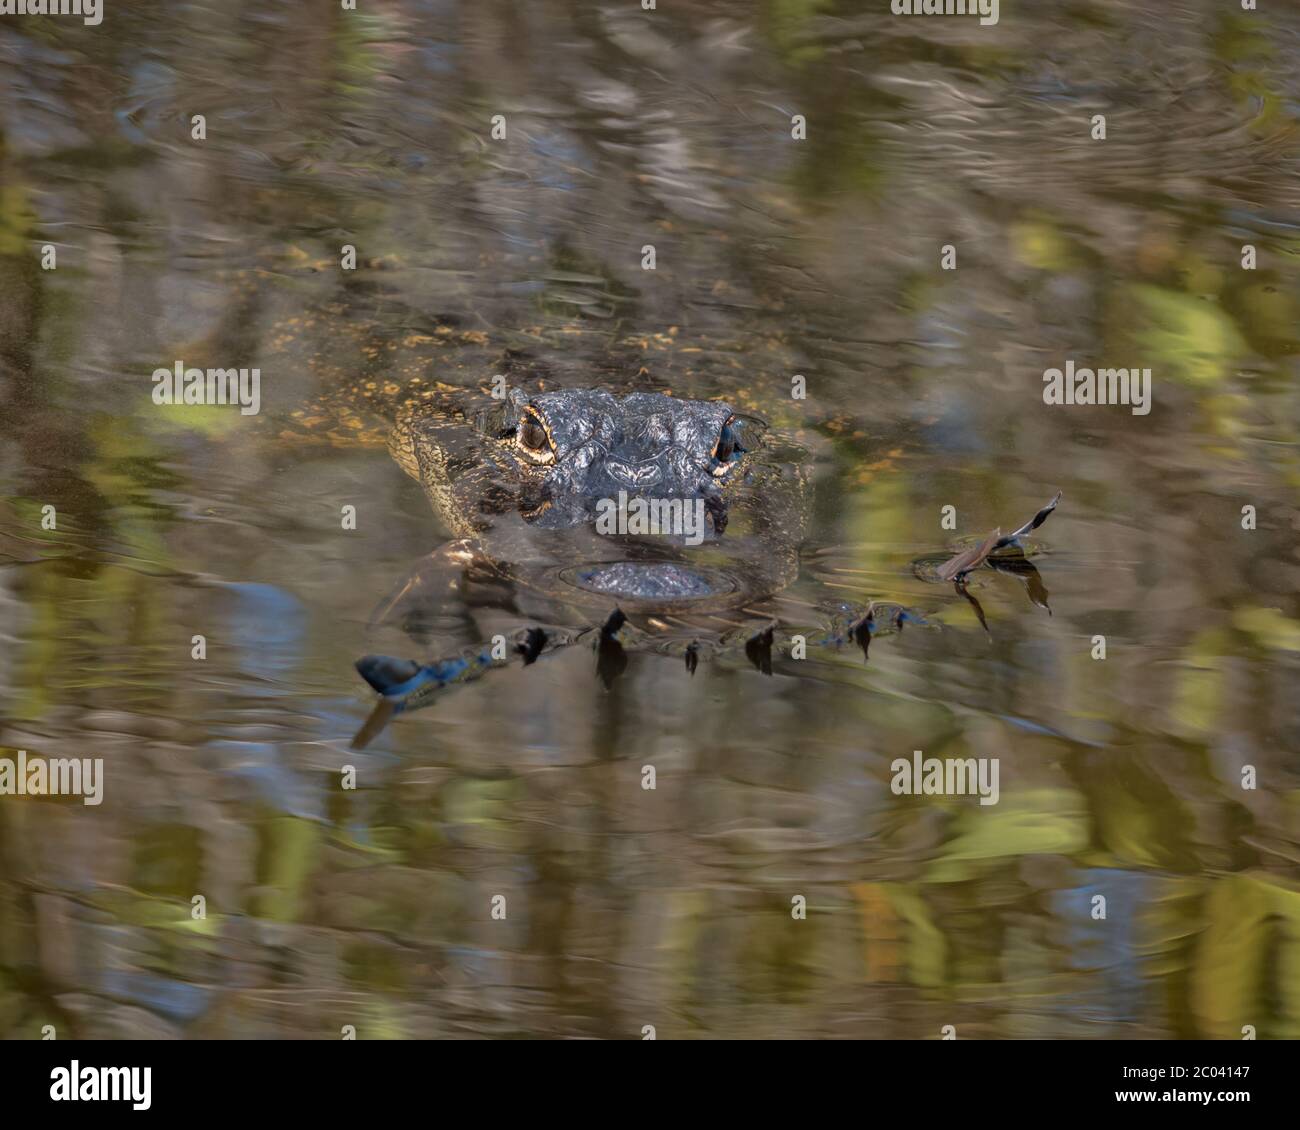 Large adult Alligator swimming in the swamp water with a Glossy Ibis in its mouth on a bright warm sunny 2020 winter day, Predator and prey in Florida Stock Photo